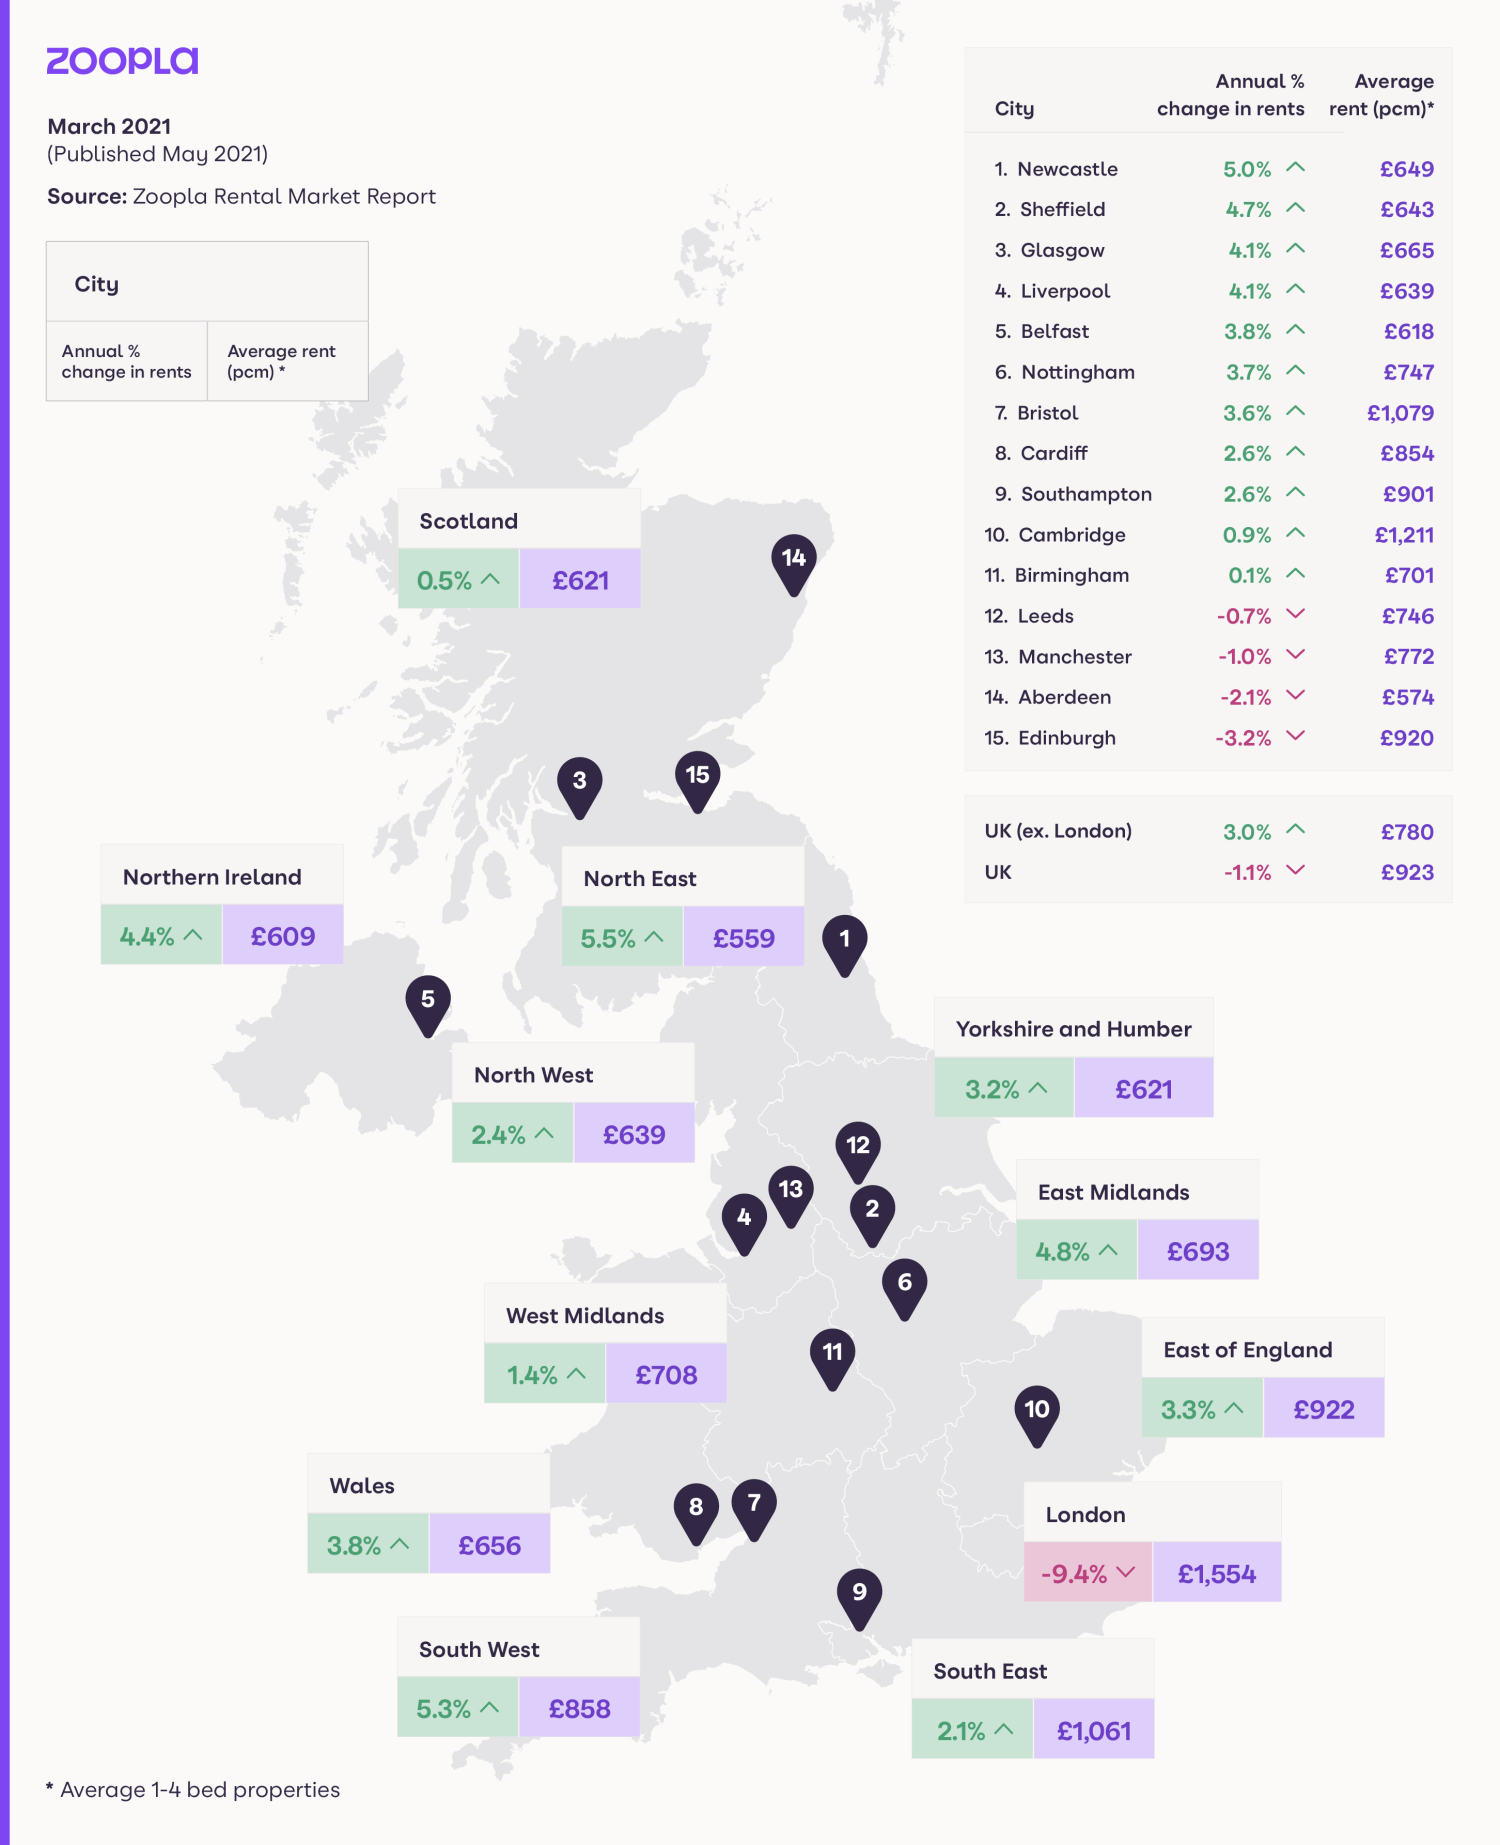 Map shows annual change in rents and average rents across the UK